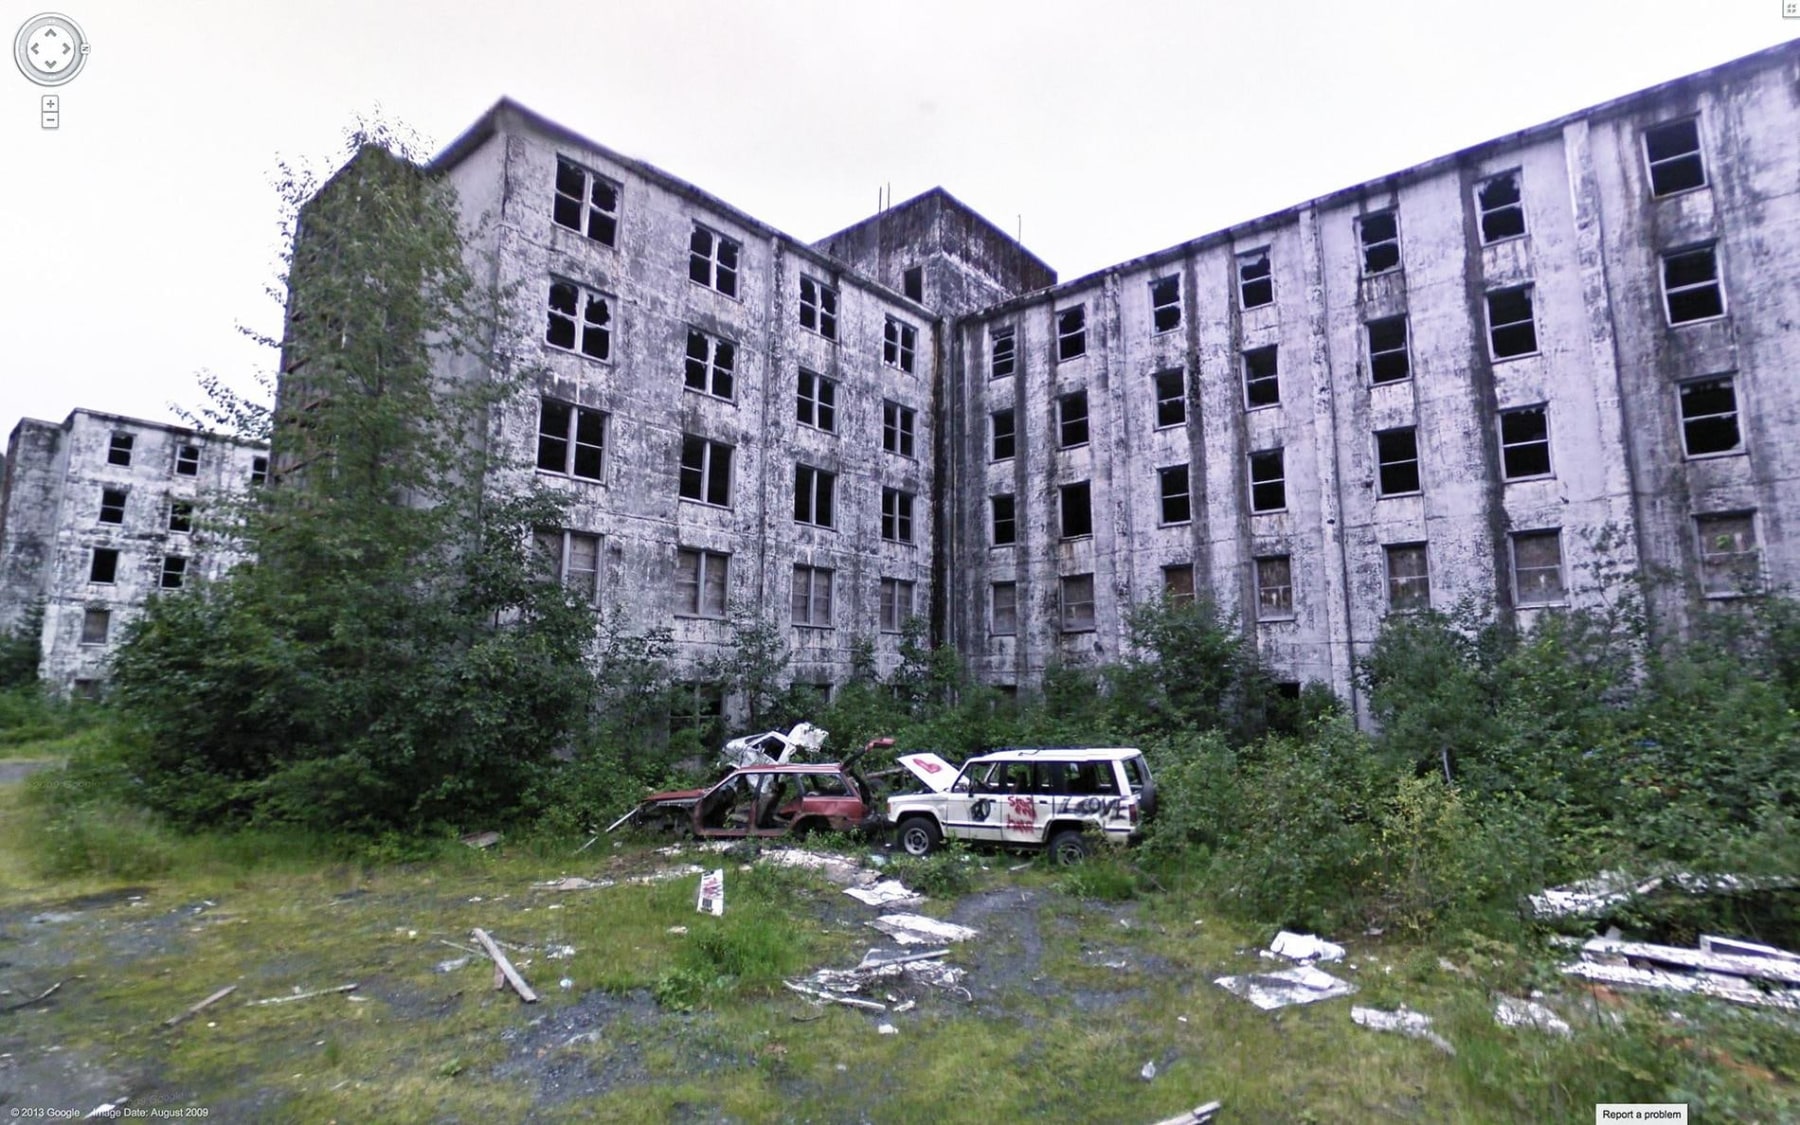 photograph of abandoned building